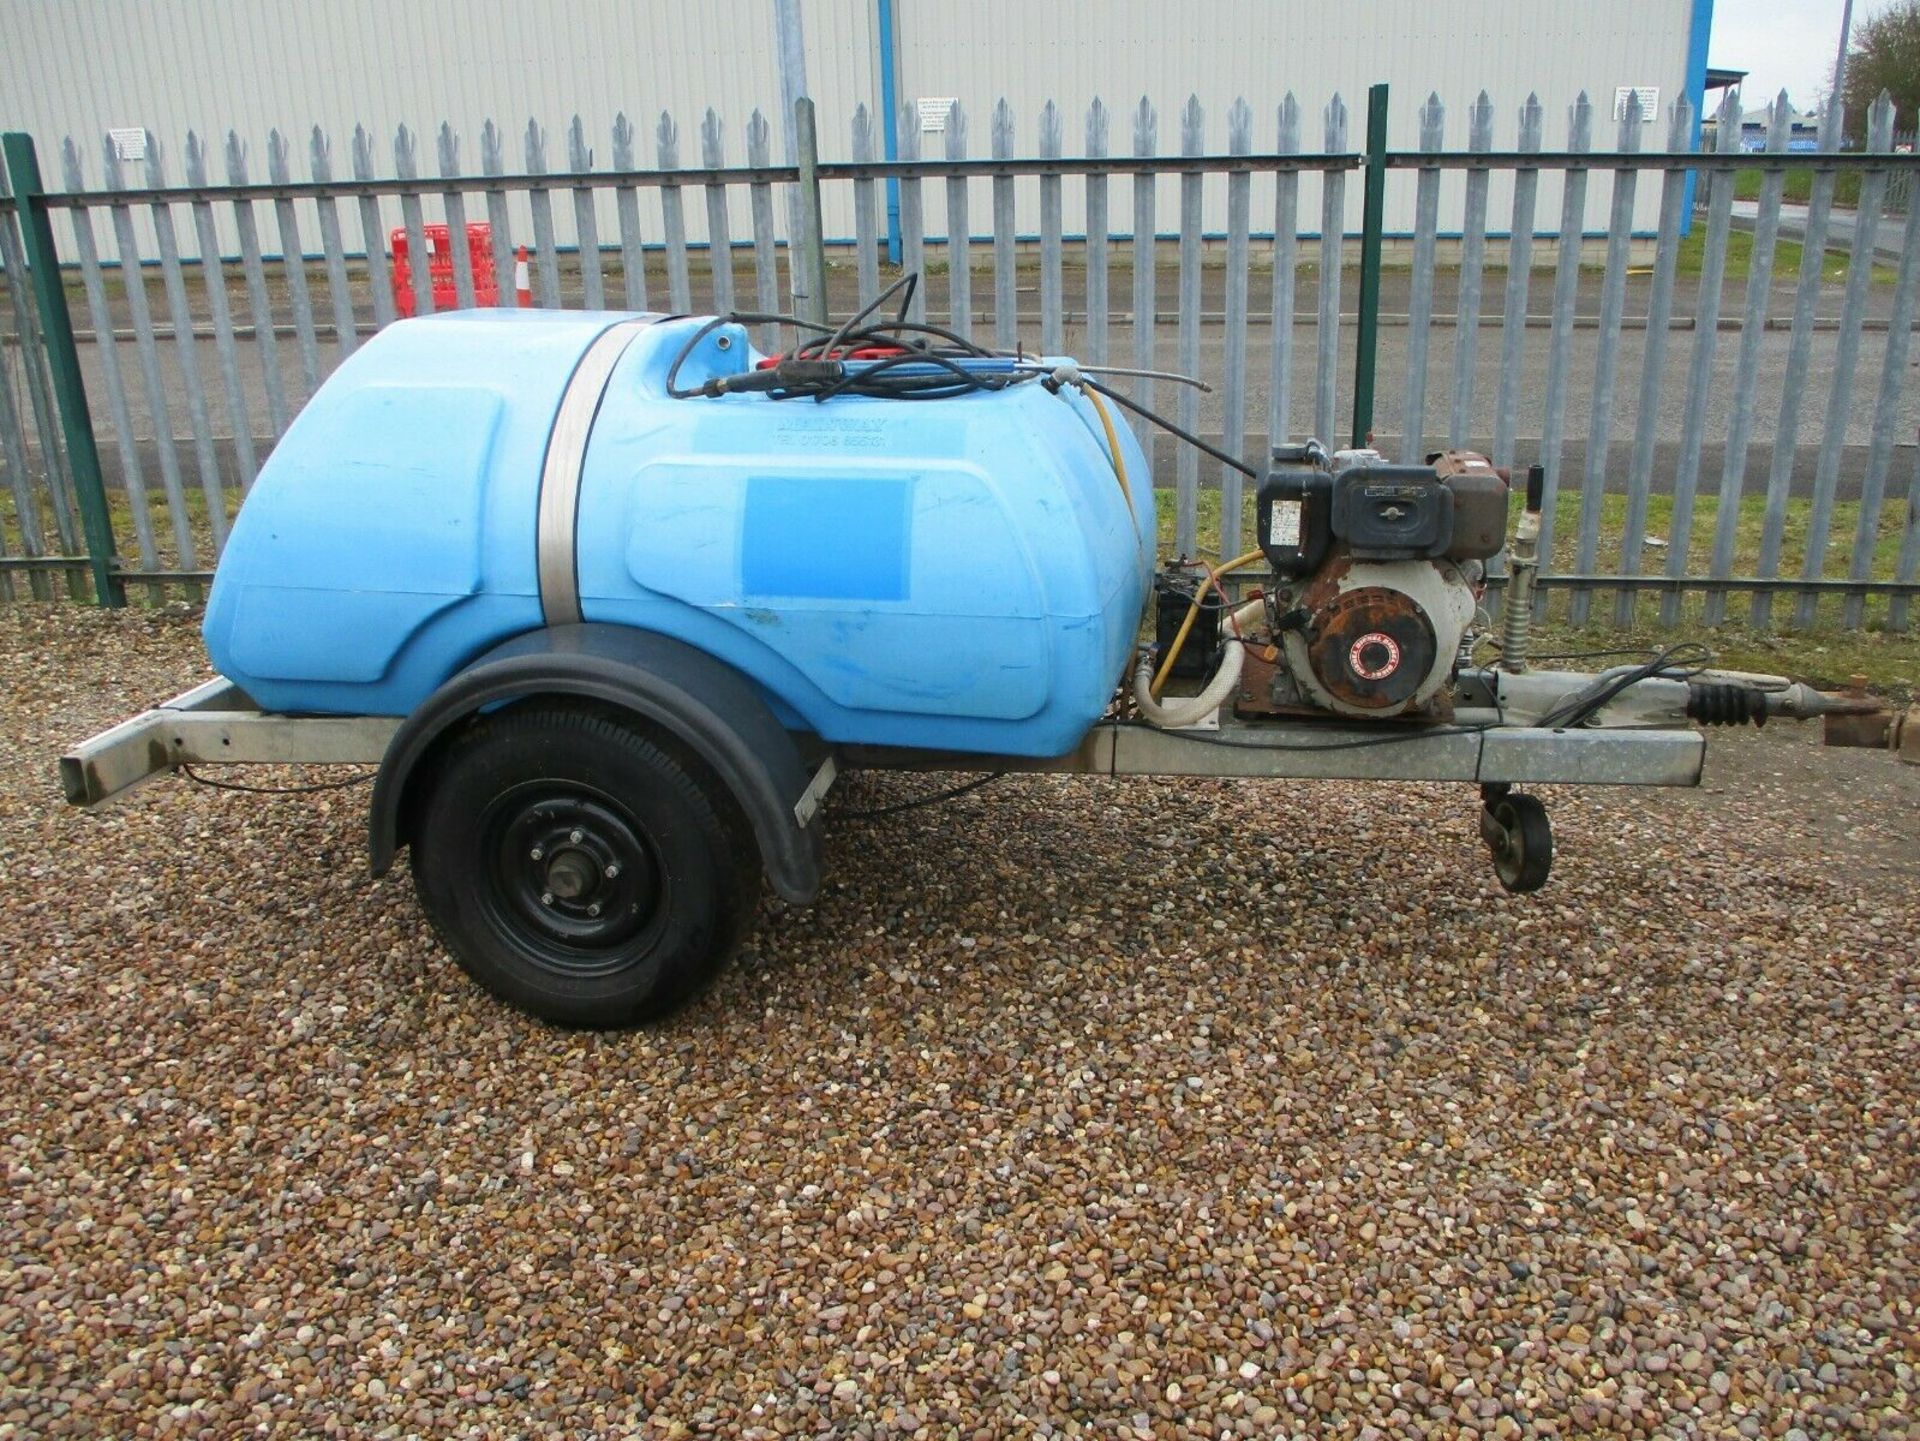 Towable bowser diesel power pressure washer